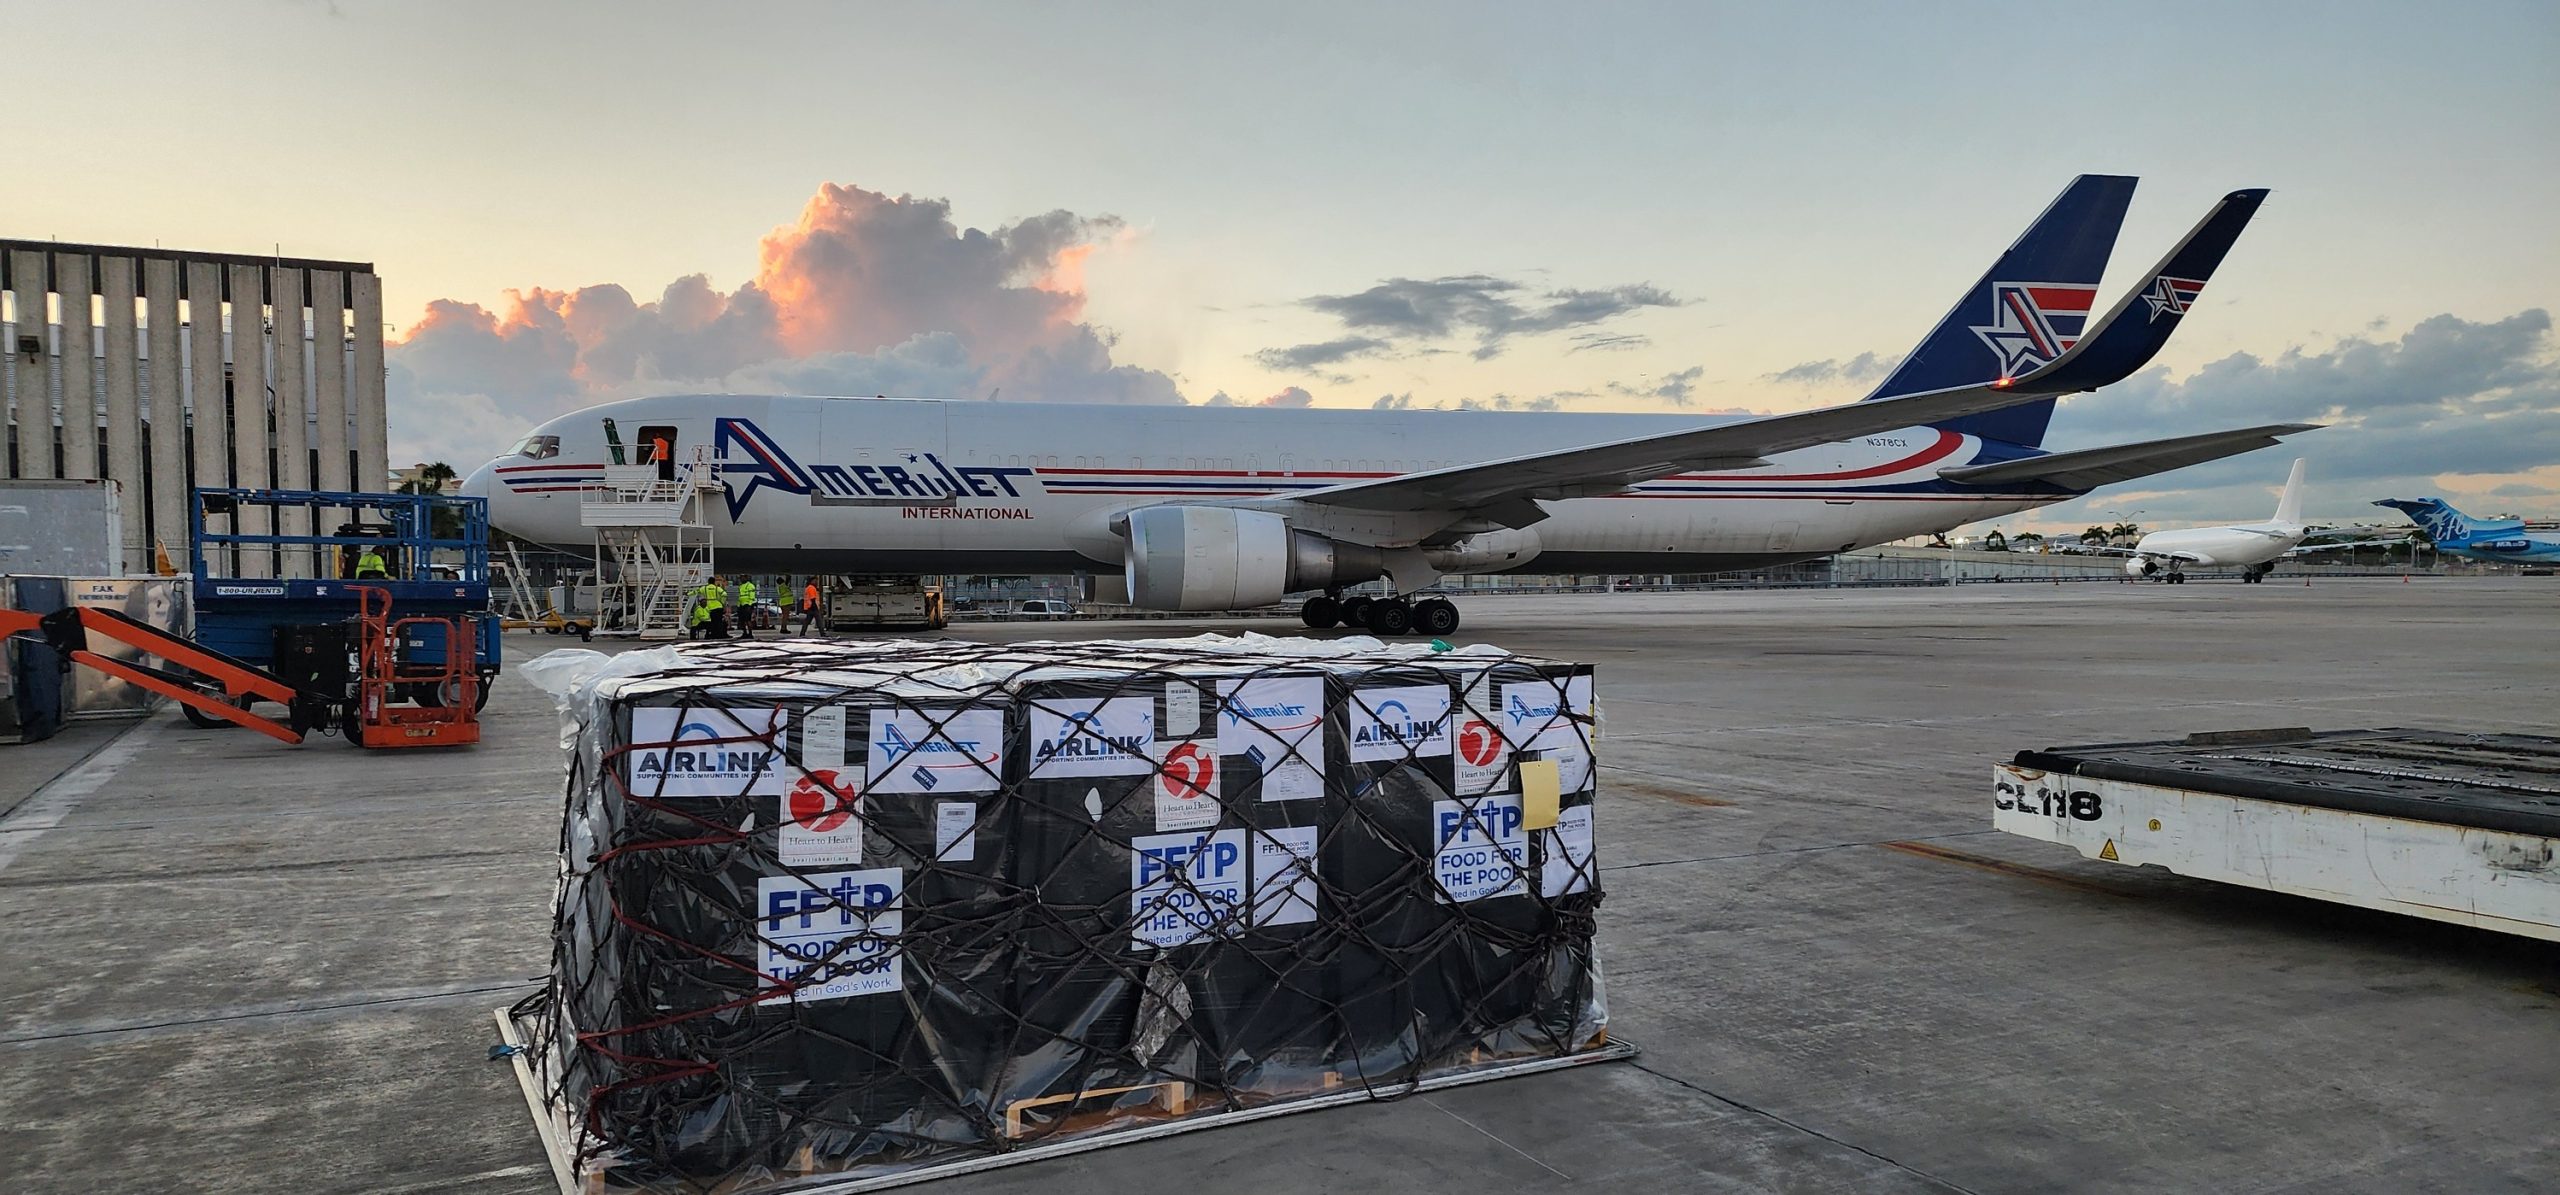 PARTNERSHIP WITH FFTP, HEART TO HEART, AND AIRLINK SENDS HYGIENE KITS TO HAITI